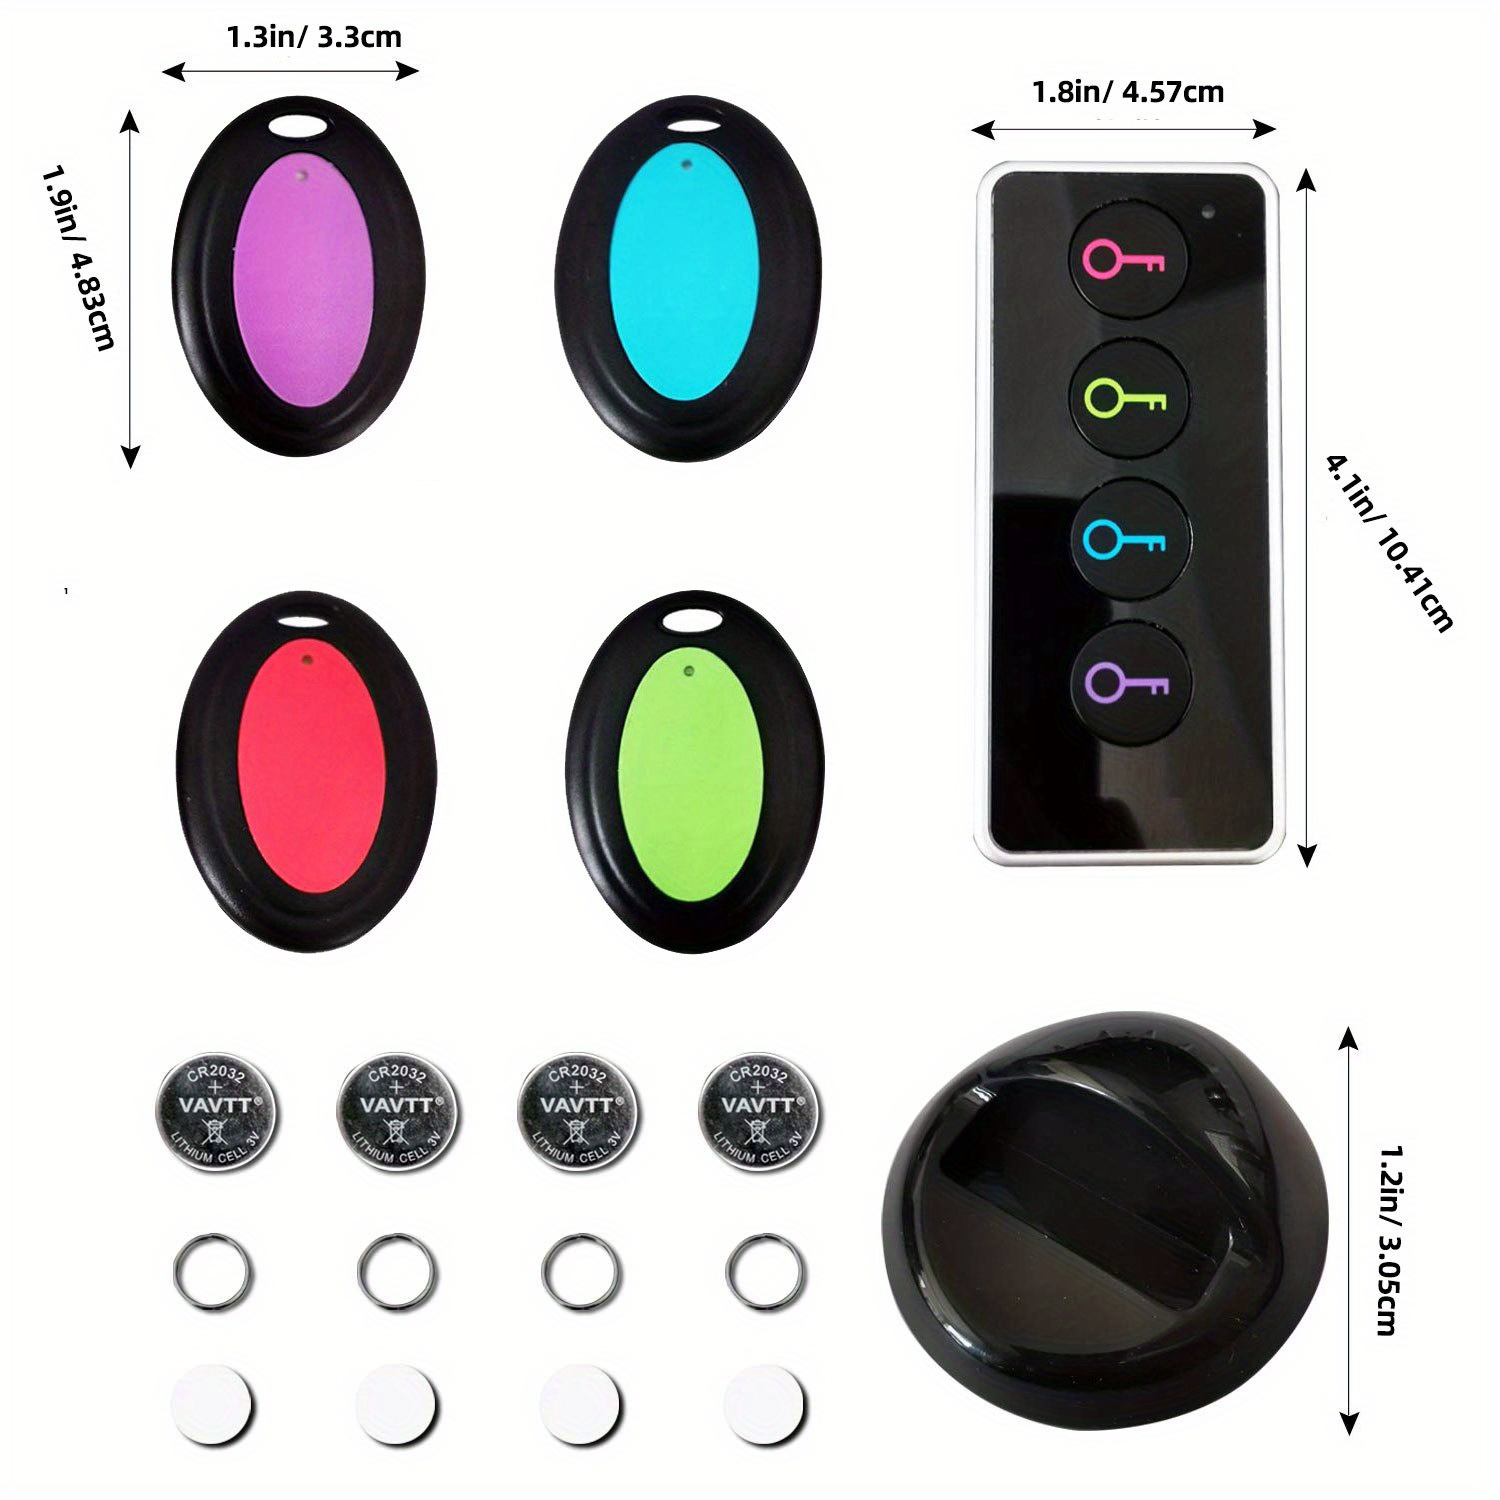 remote key finder anti lost reminder tracker wireless key rf locator for phone pets keychain wallet luggage pet cat dog tracking tracker 1 rf transmitter 4 receivers halloween gifts for friends and family details 2